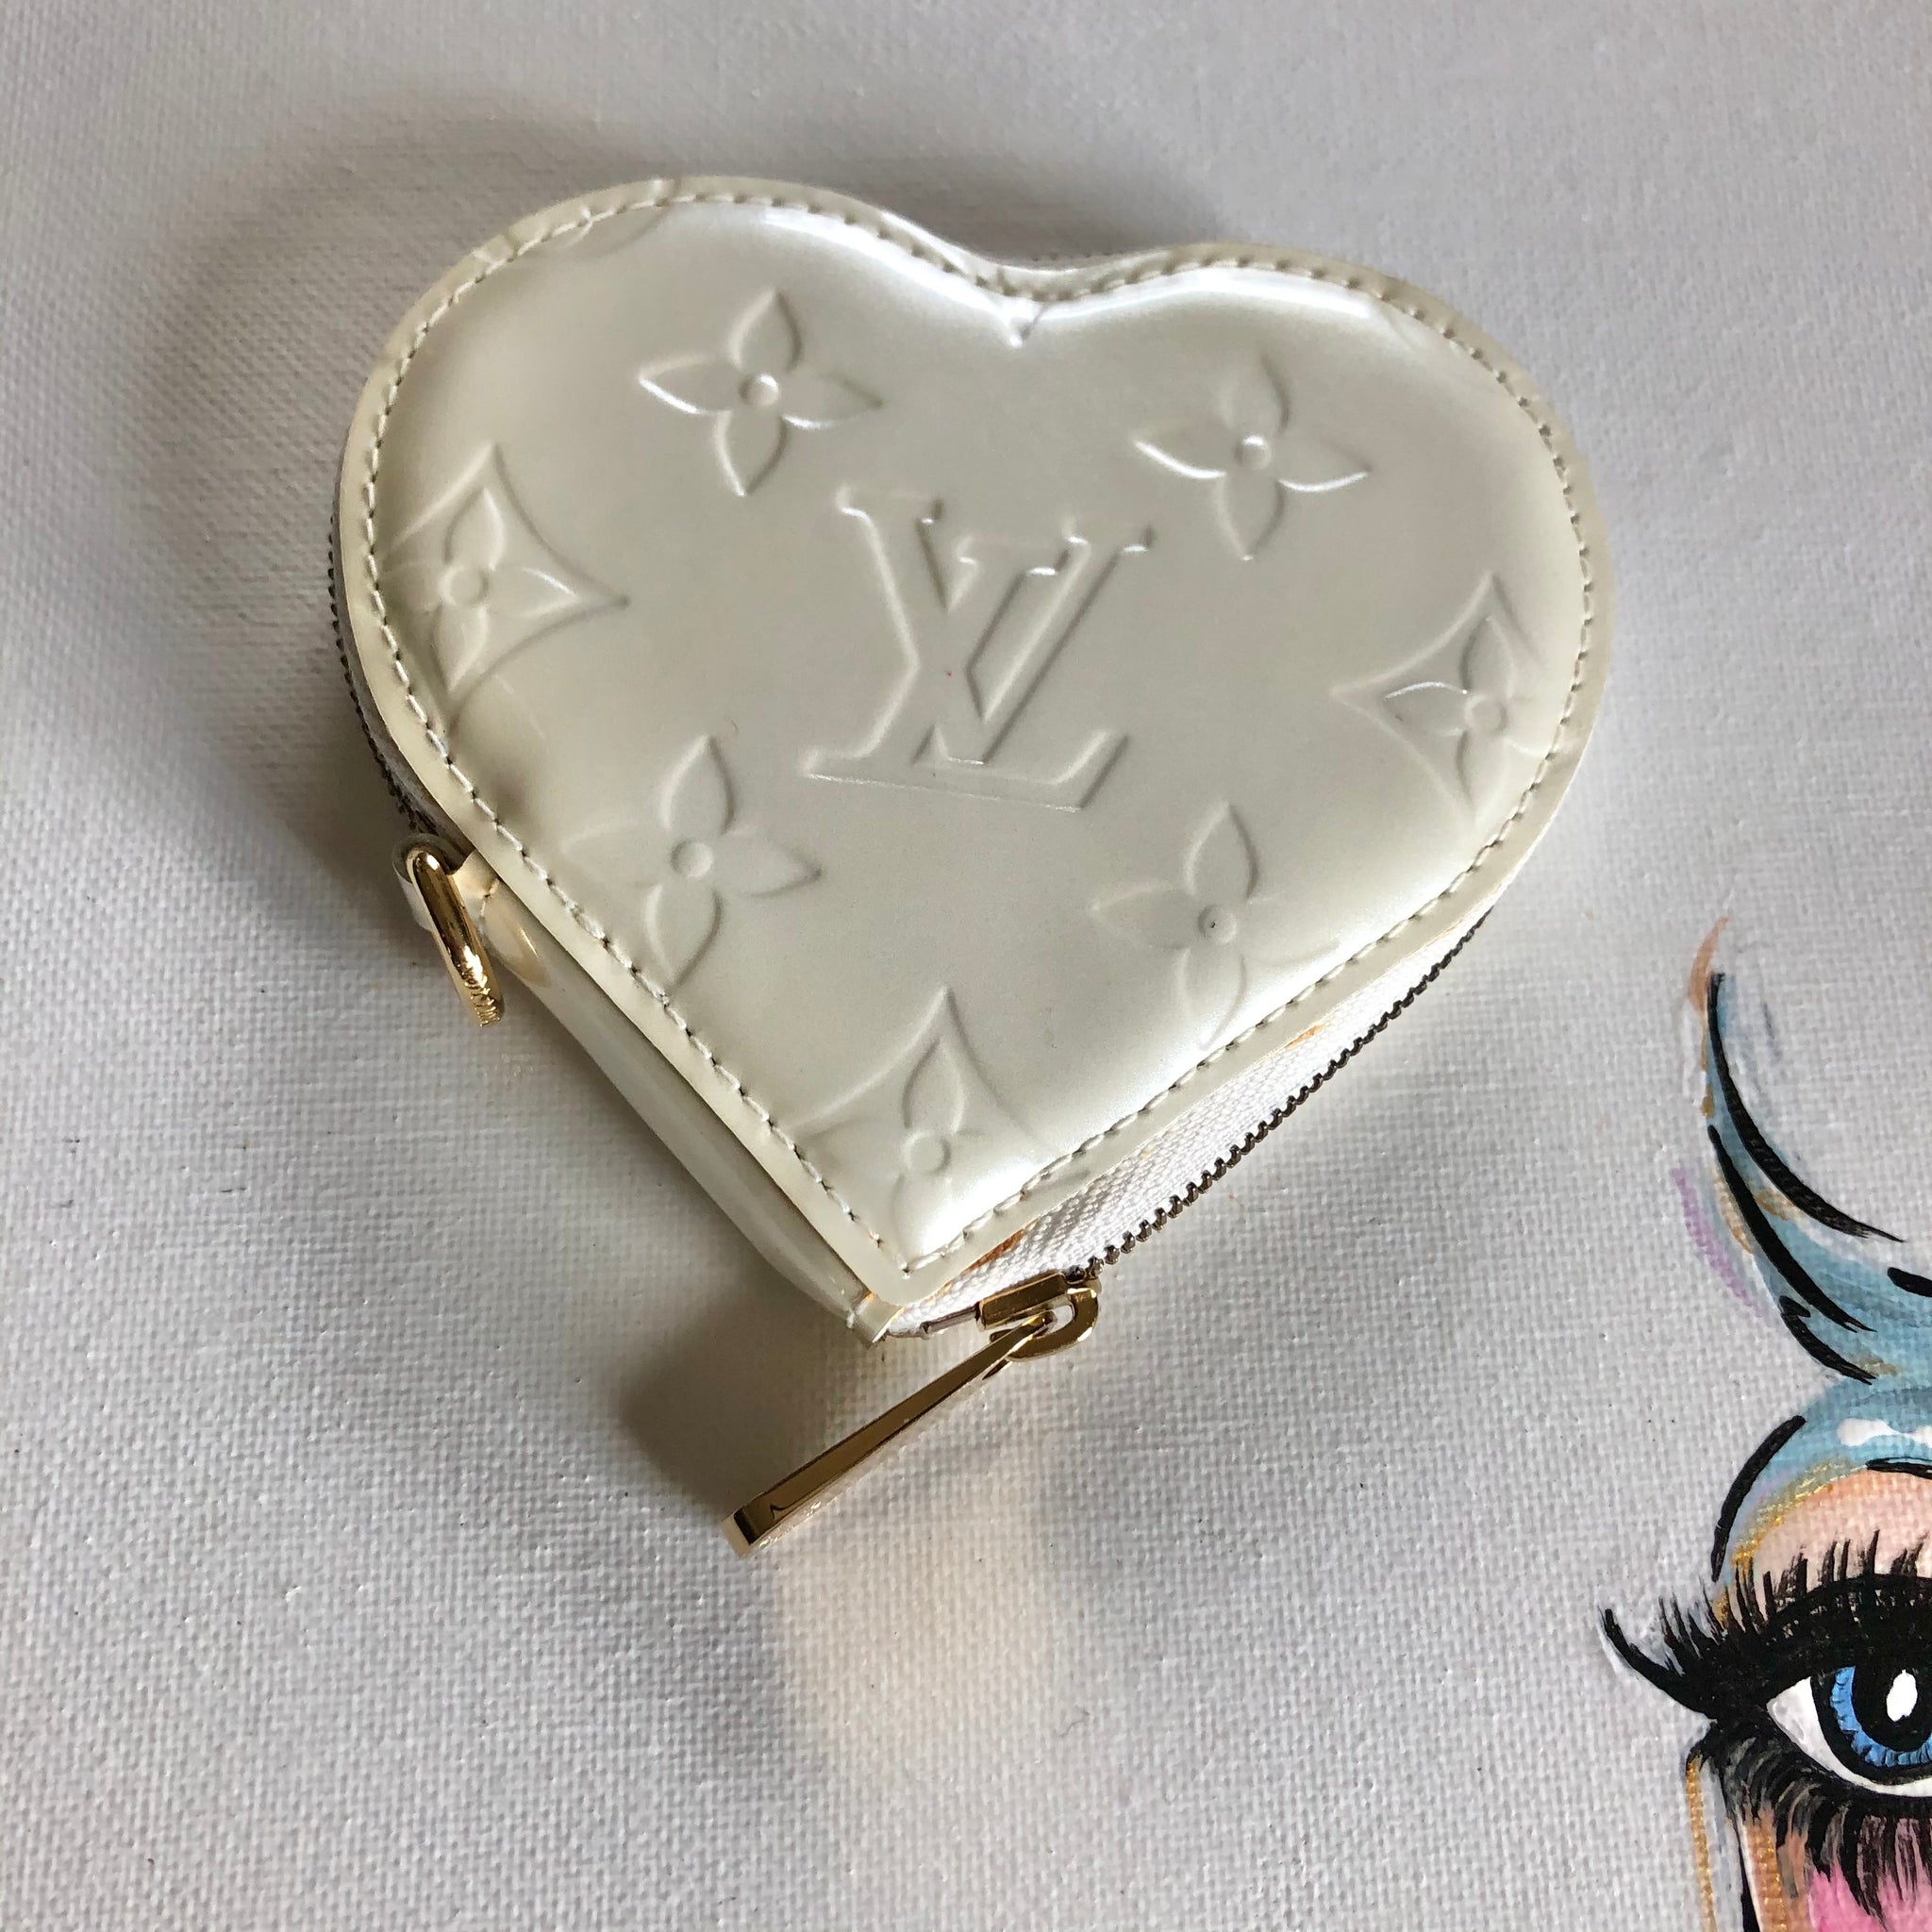 Lv Heart Coin Purse - For Sale on 1stDibs